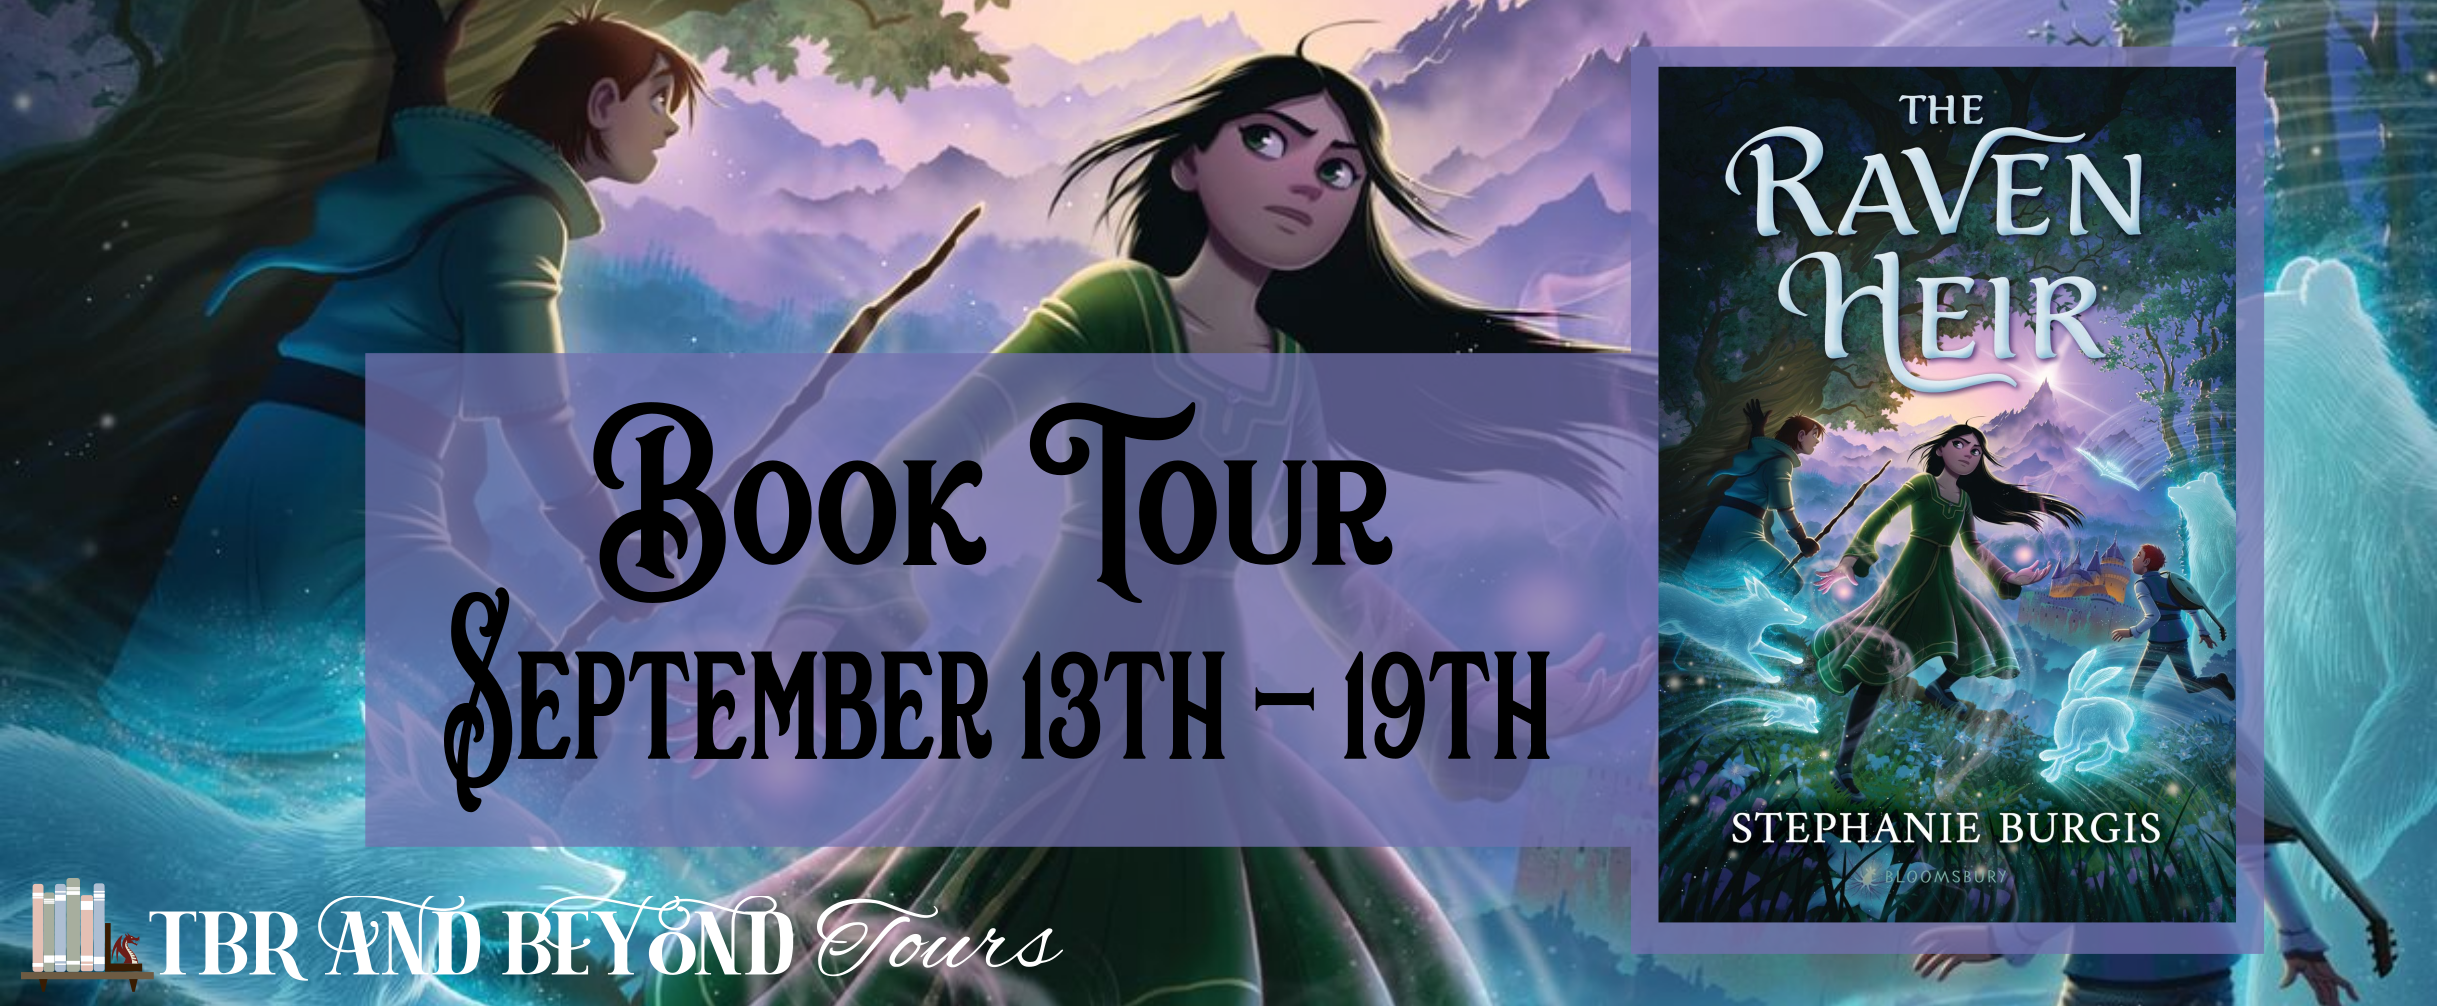 Blog Tour: The Raven Heir by Stephanie Burgis (Interview!)